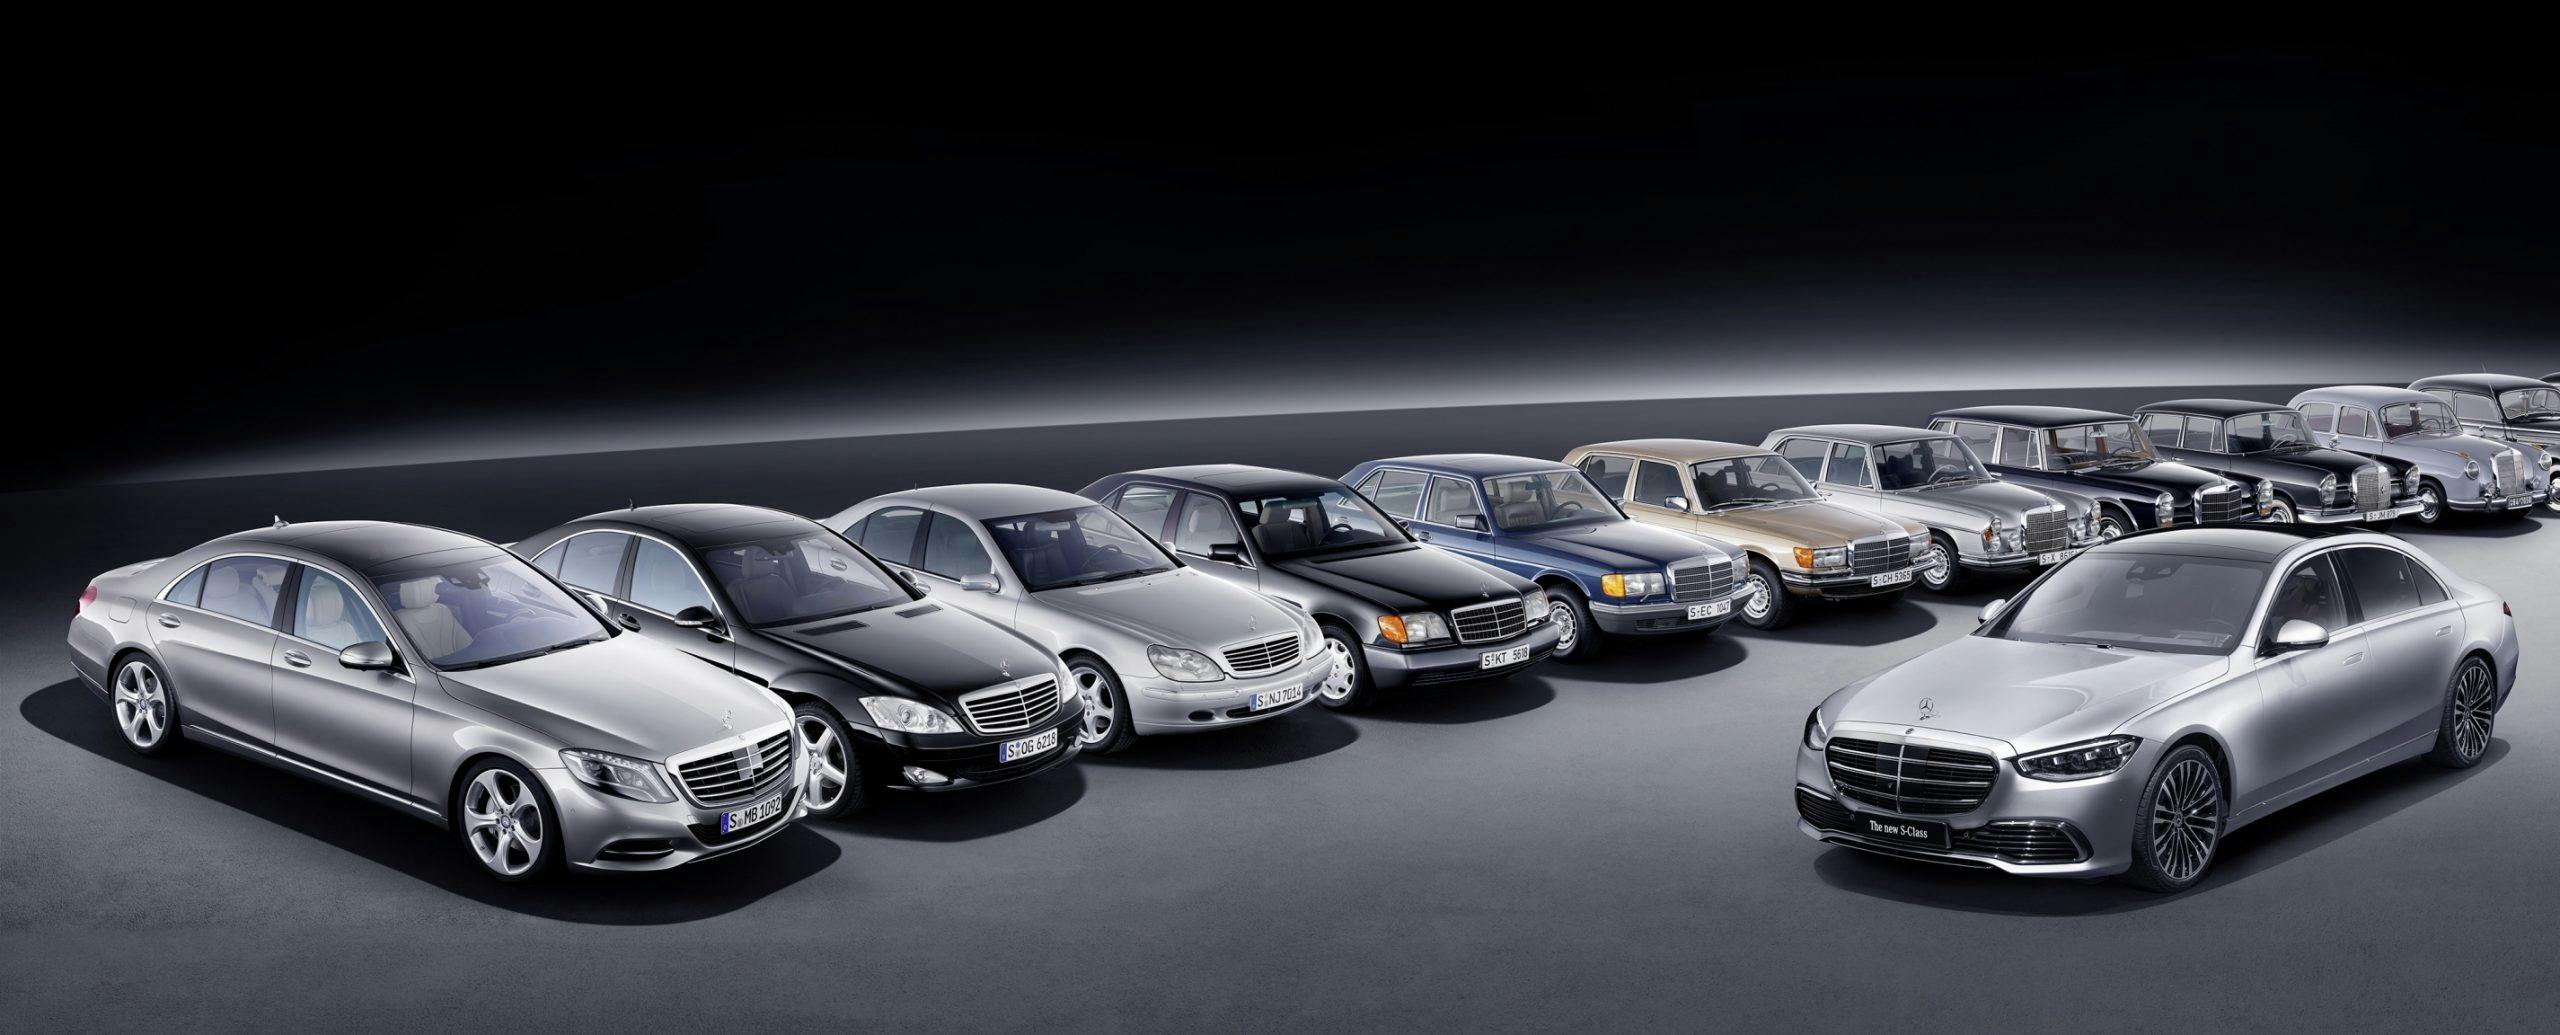 History of the Mercedes-Benz C-class